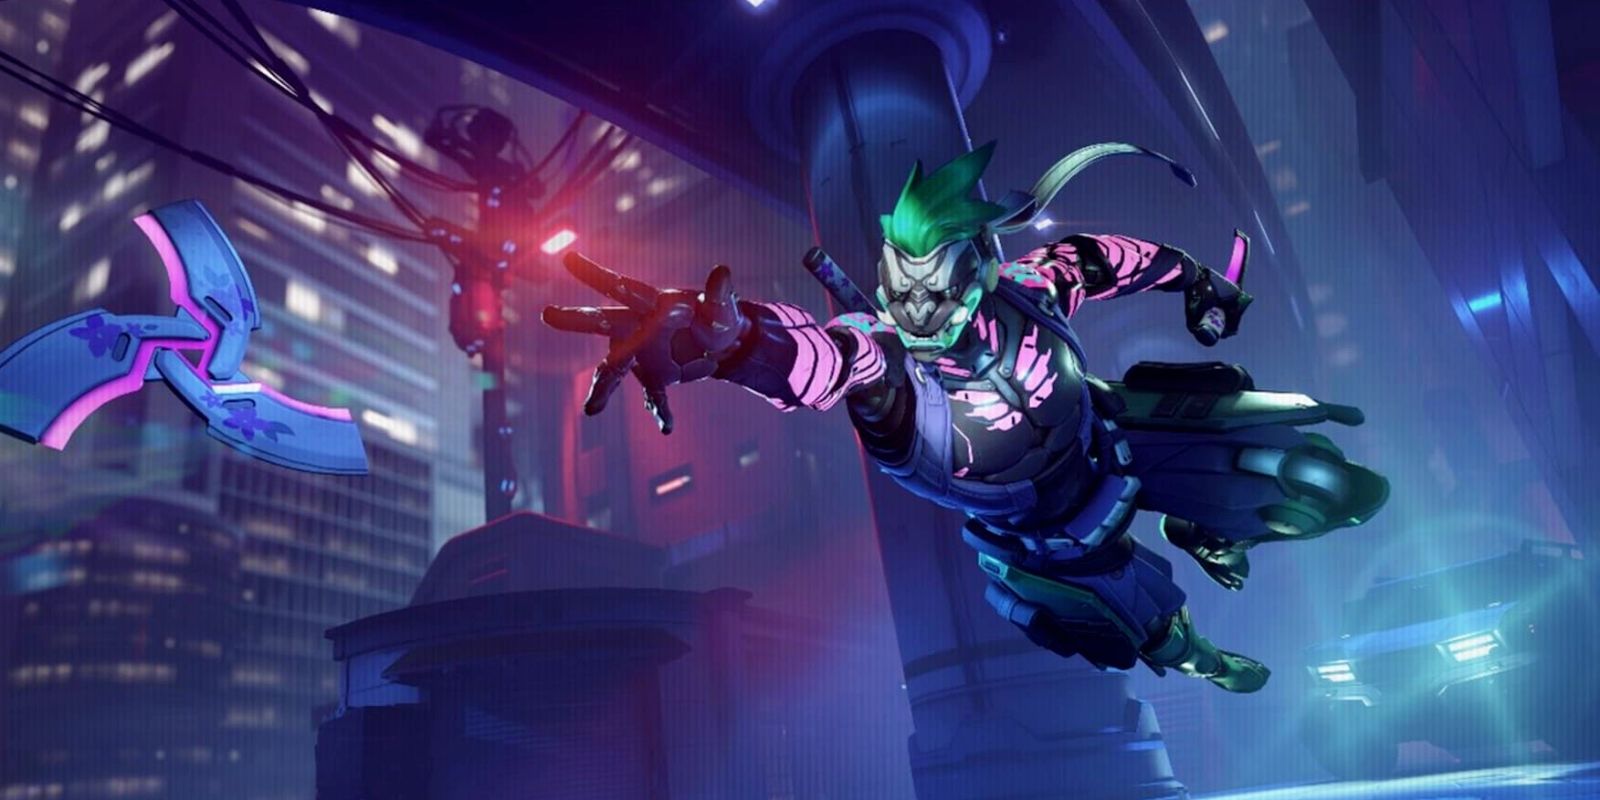 An image of Overwatch 2's first Mythic skin, Genji's Cyber Demon.